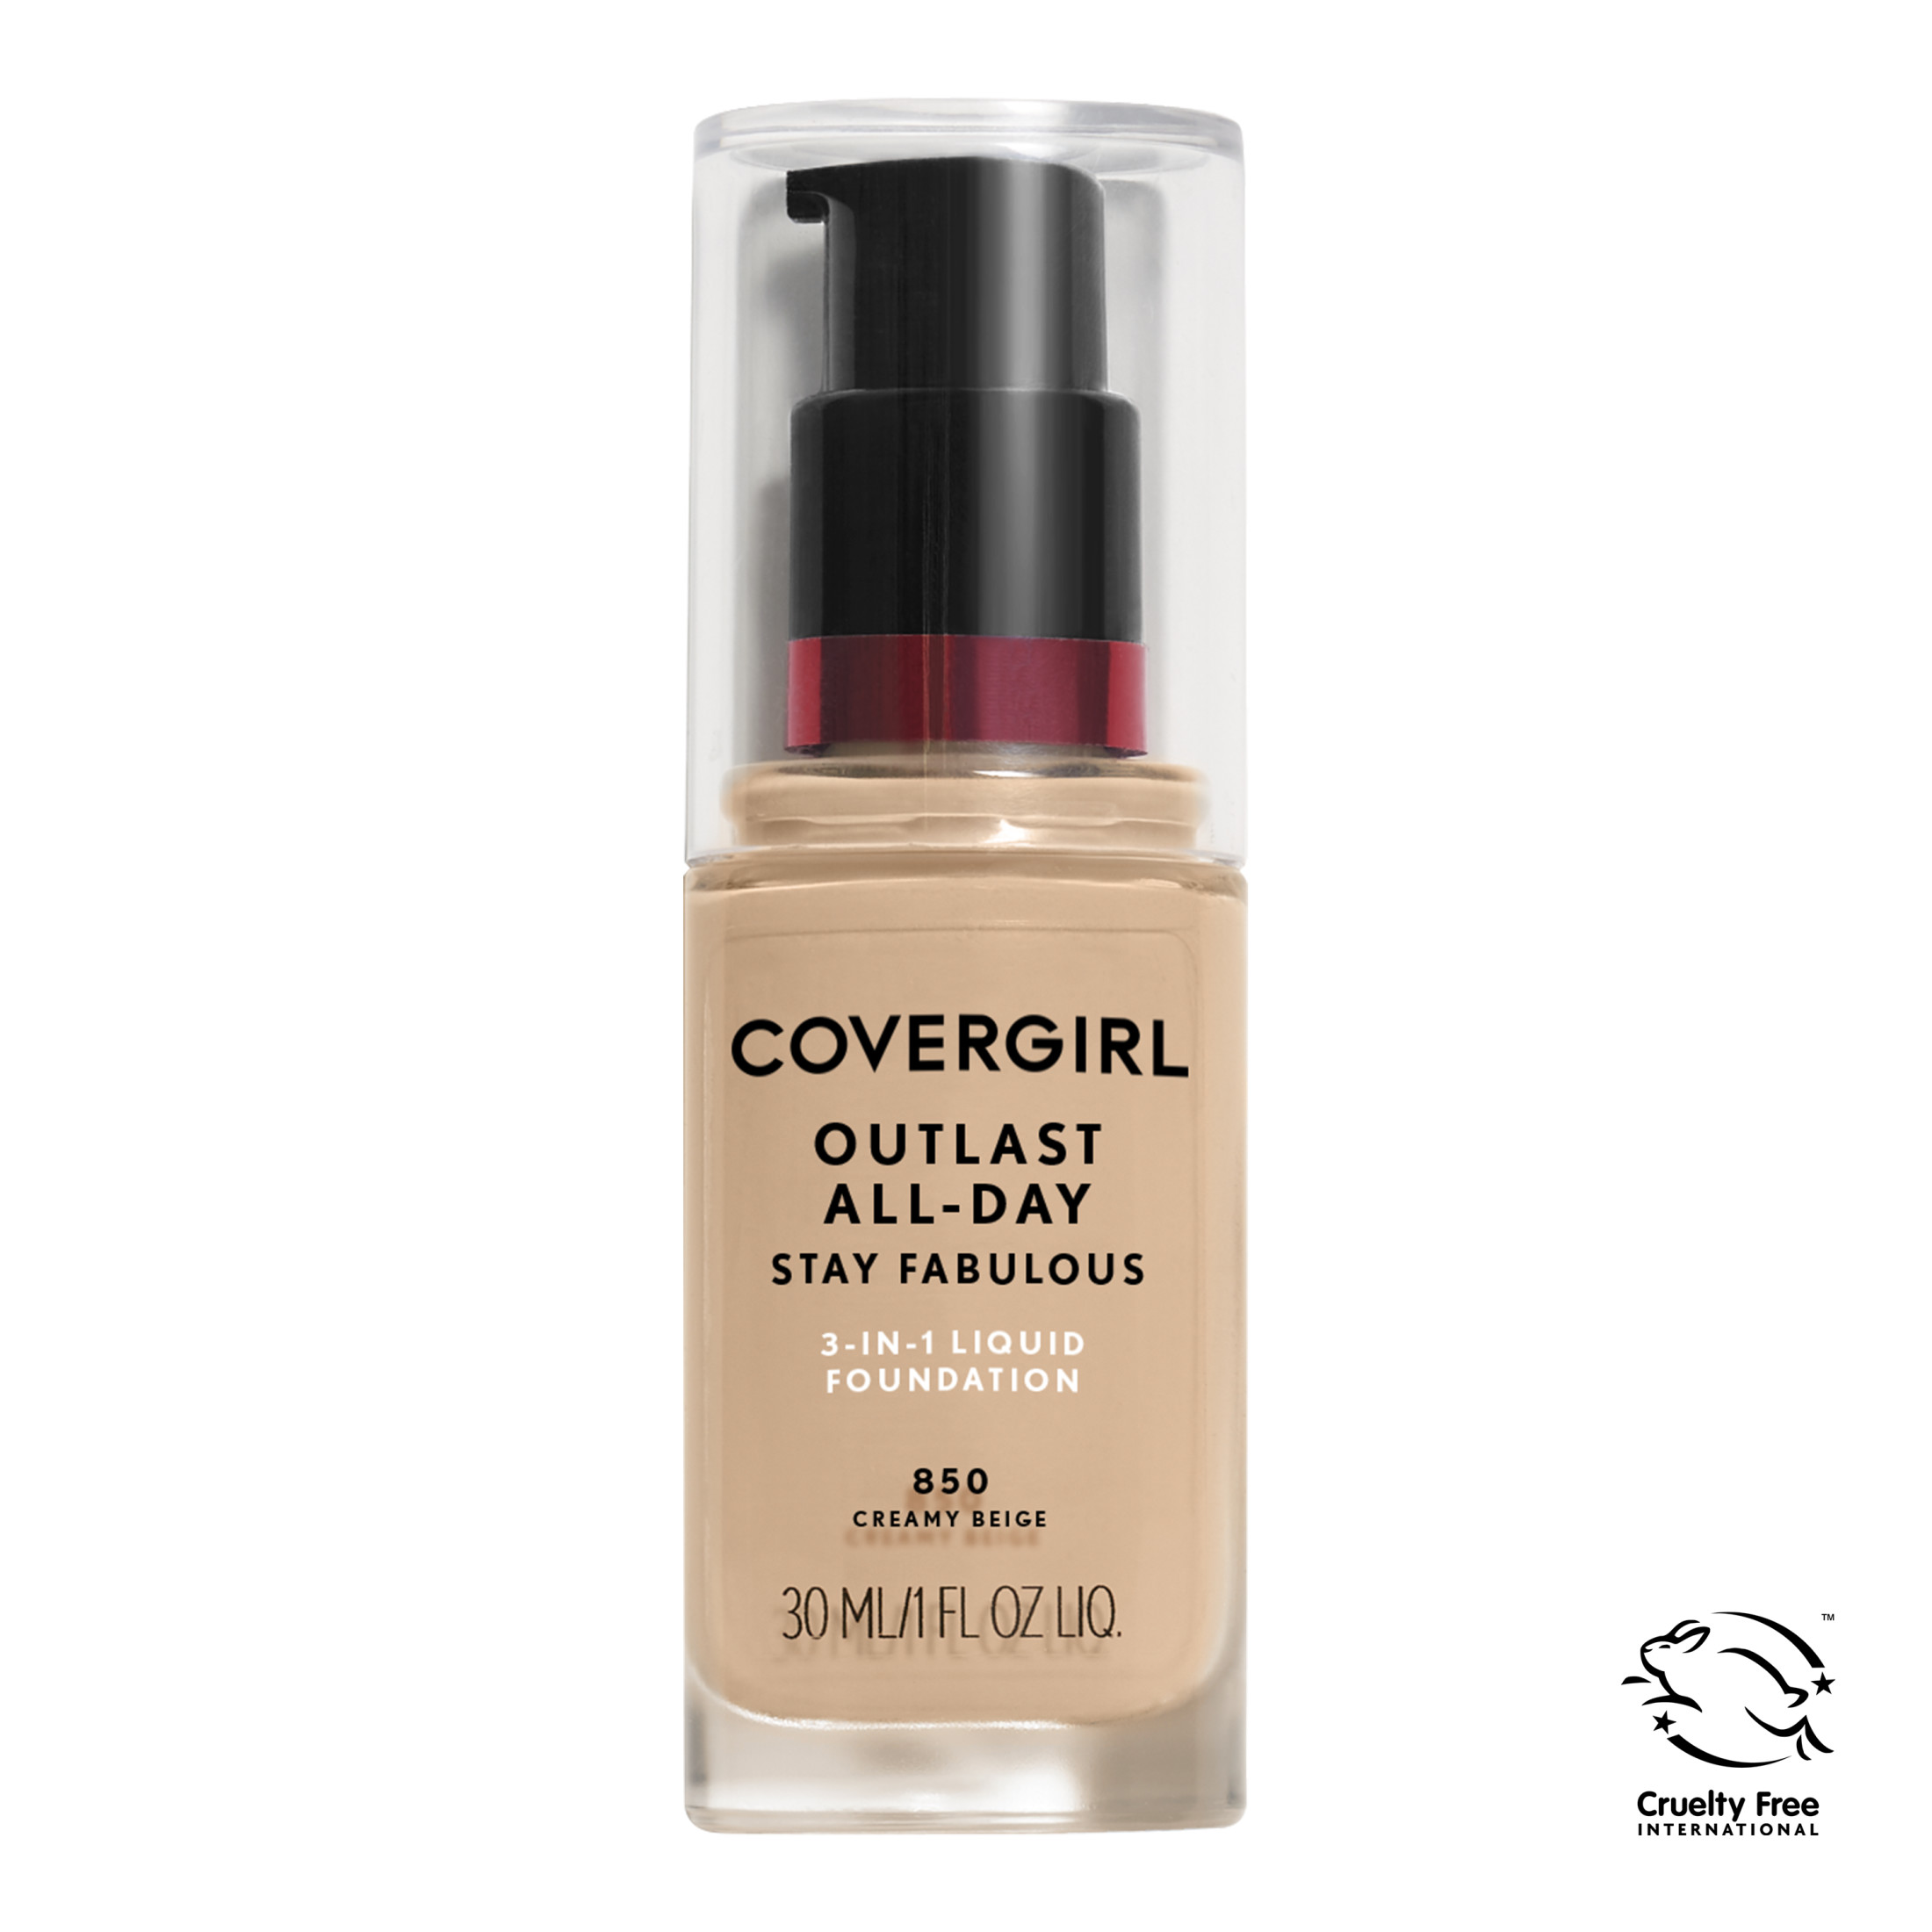 COVERGIRL Outlast All-Day Stay Fabulous 3-in-1 Foundation, 825 Buff Beige, 1 oz - image 1 of 6